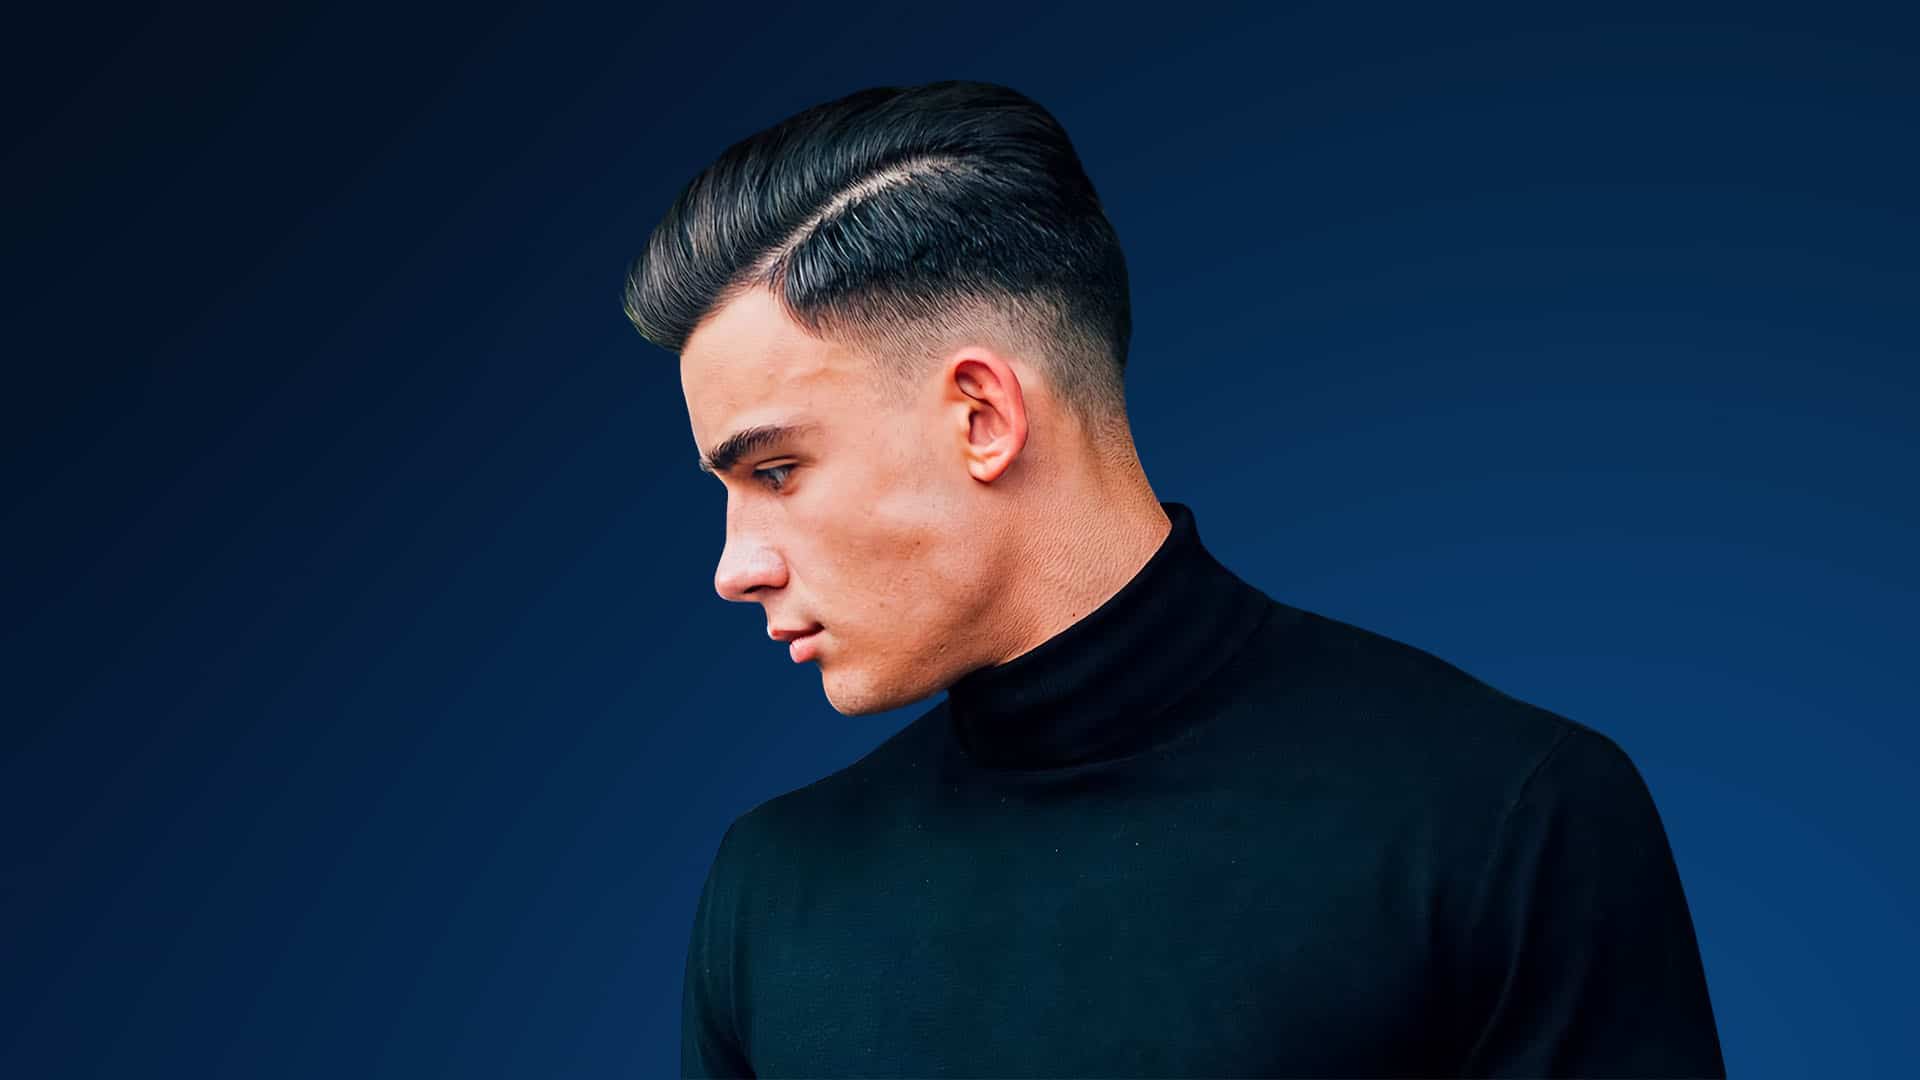 55 Sensational Comb Over Haircuts - The Best Way to Keep It Classy